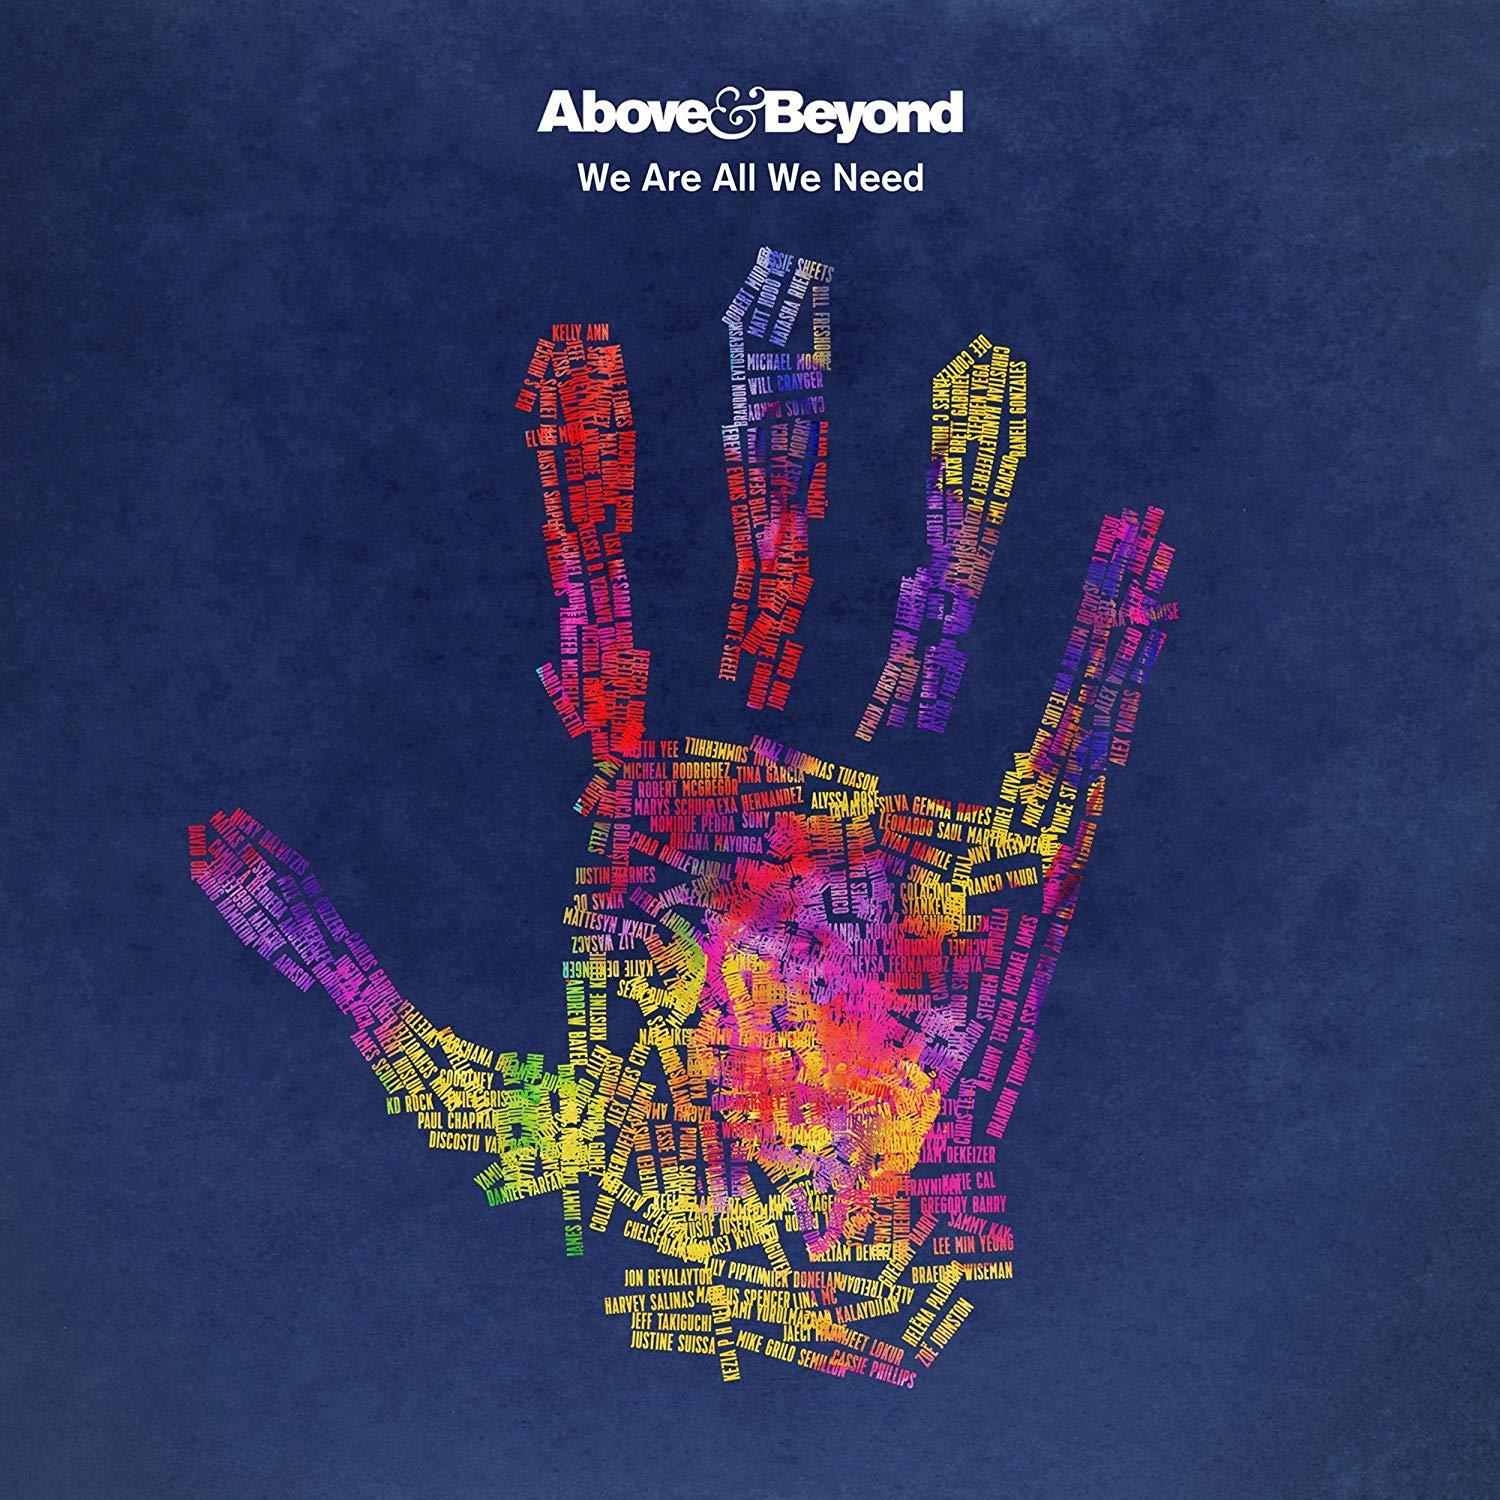 Beyond (Vinyl) WE - WE NEED & ARE - Above ALL